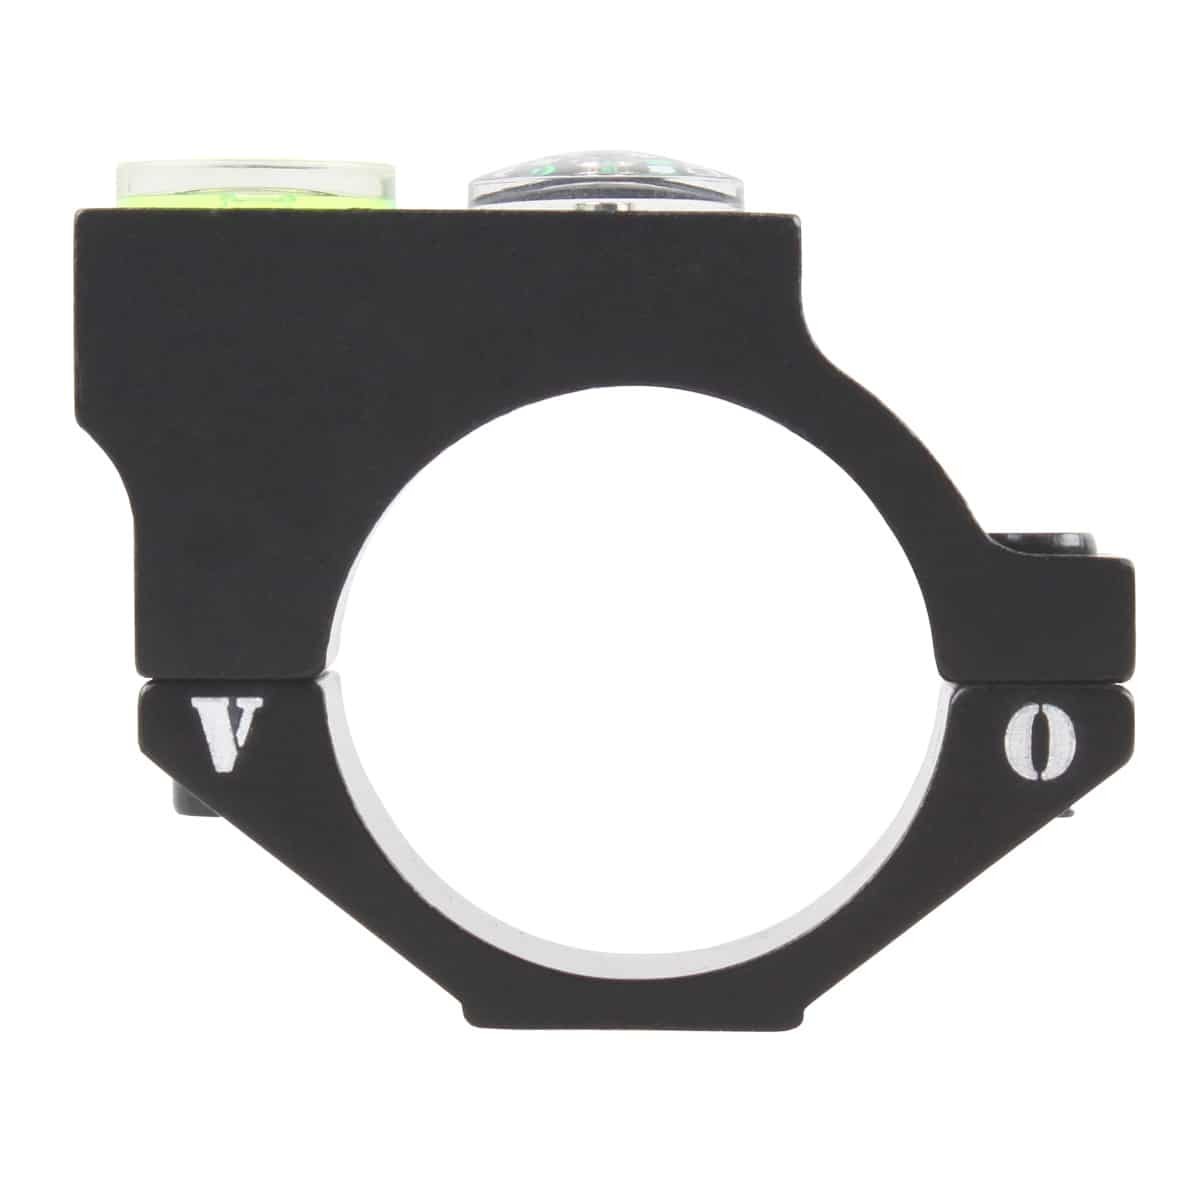 25.4mm ACD Bubble Level Mount w/ compass